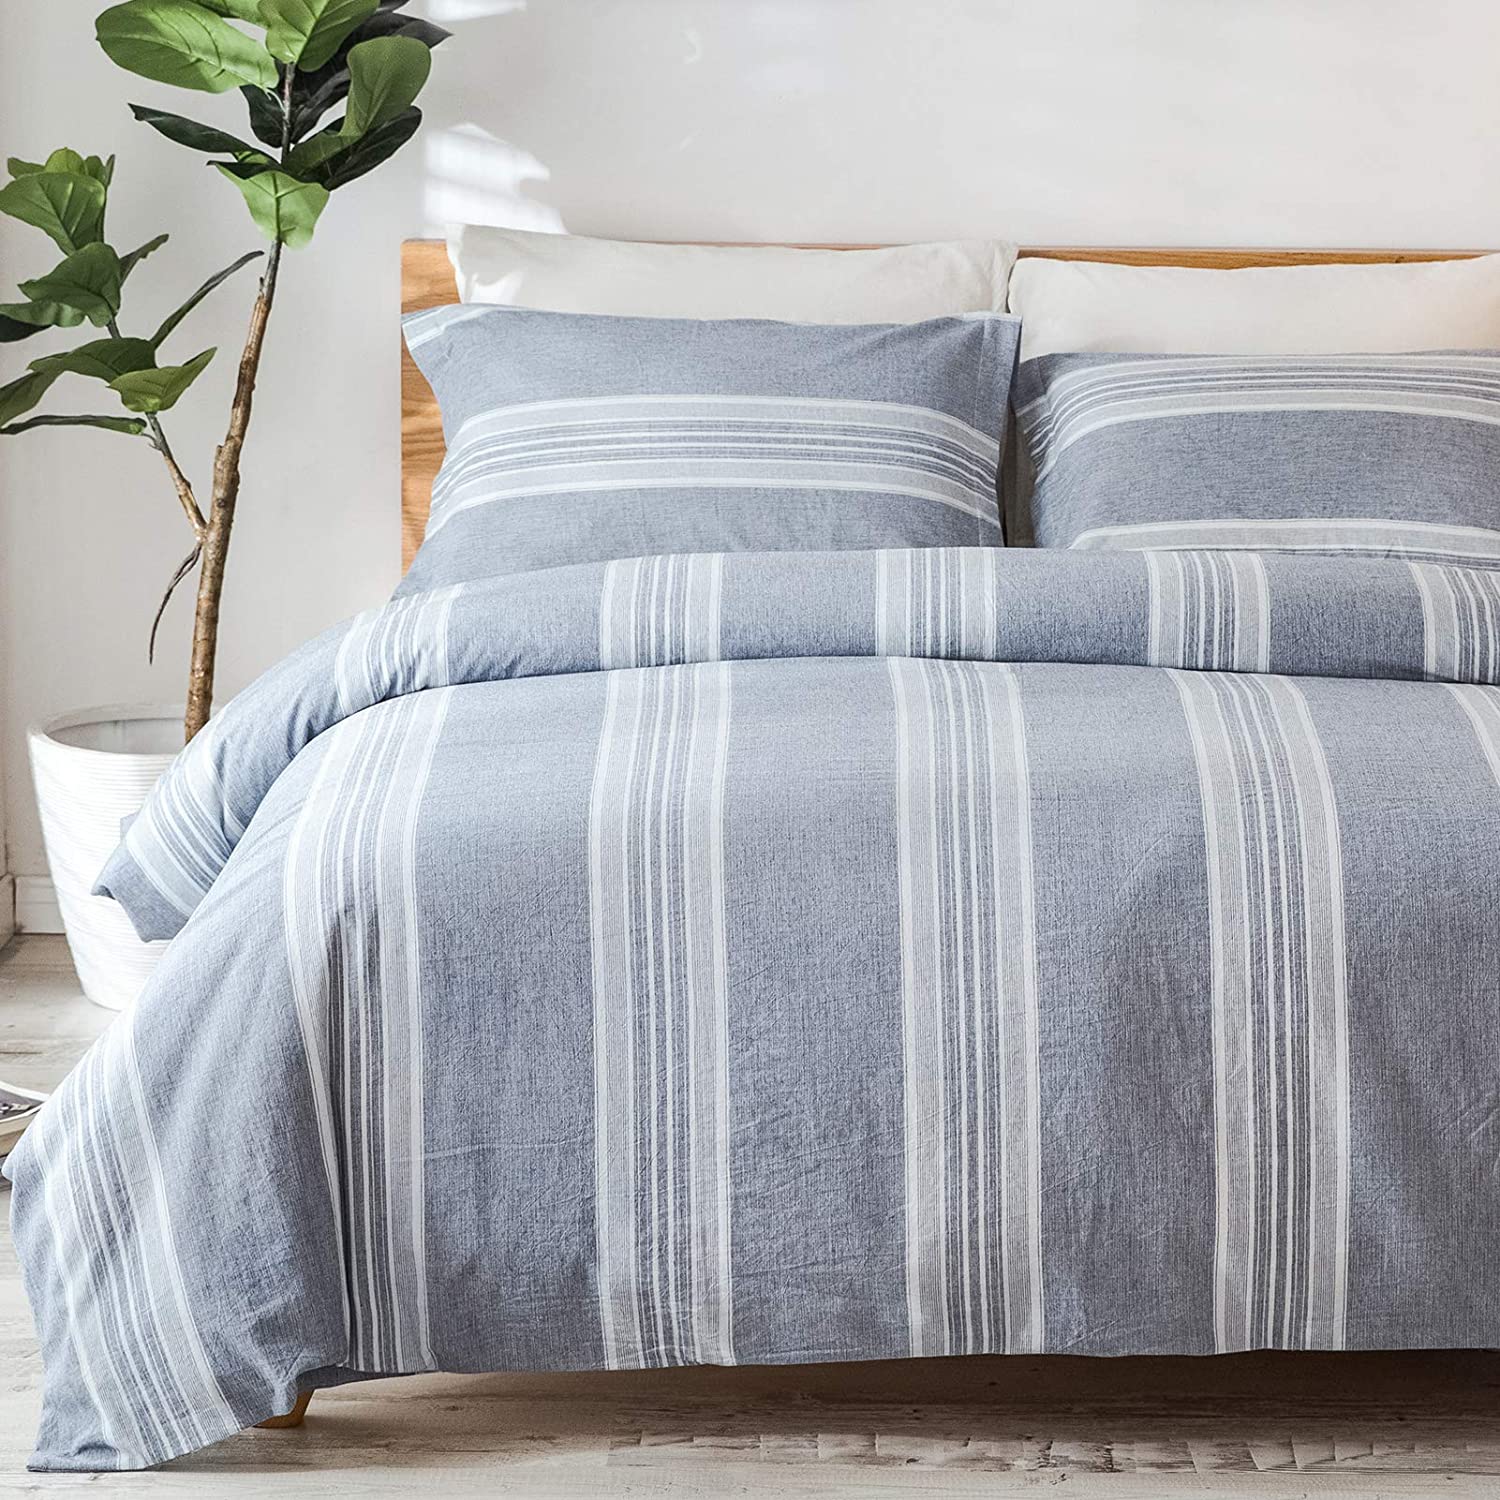 Price:$69.99  Home 100% Washed Cotton Duvet Cover Set King Size, Stripe 3PCS Cozy Bedding Set with 2 Pillow Cases, Soft and Breathable Comforter Cover Set for All Seasons, 106''x 92'', Blue Beige : Home & Kitchen